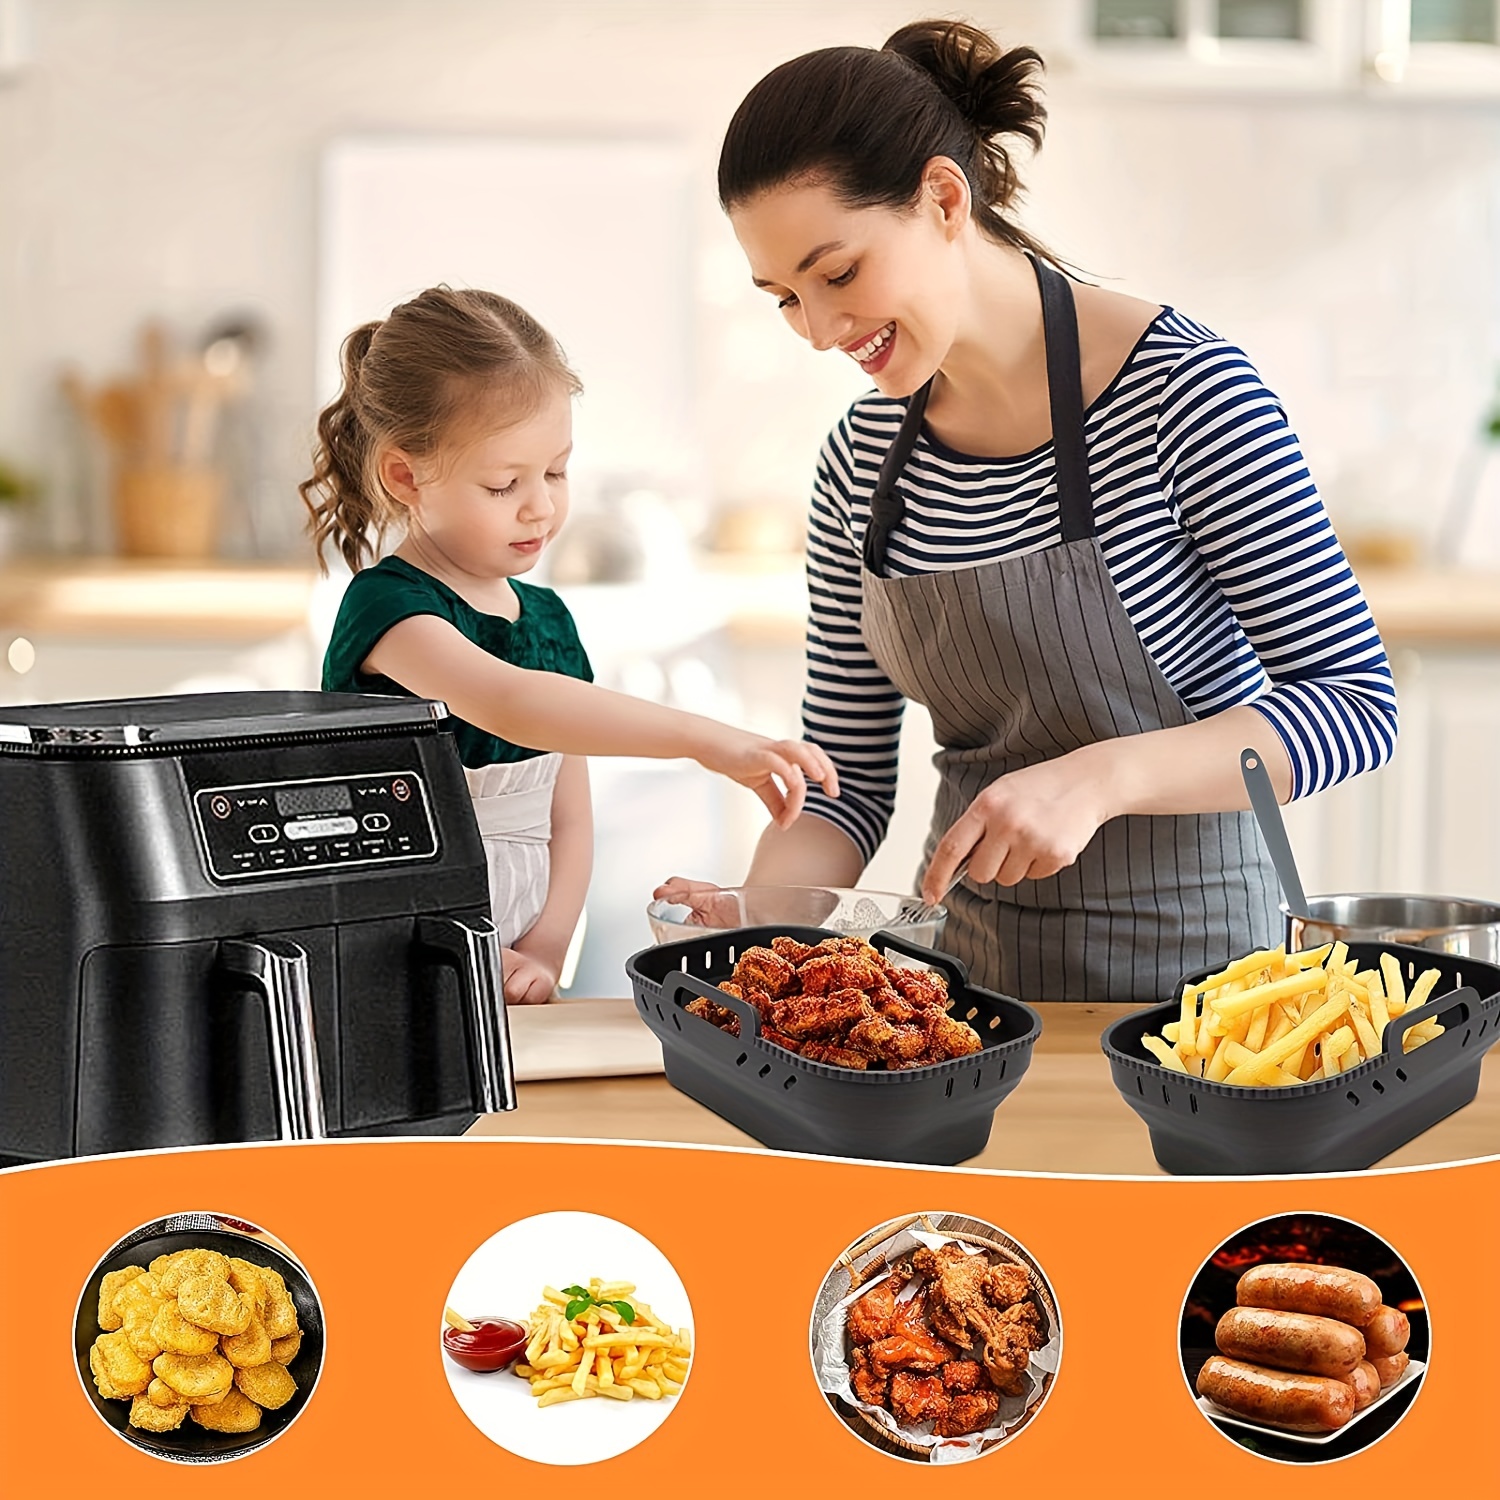 Nonstick Silicone Air Fryer Liner Multifunctional Square Pad - Temu